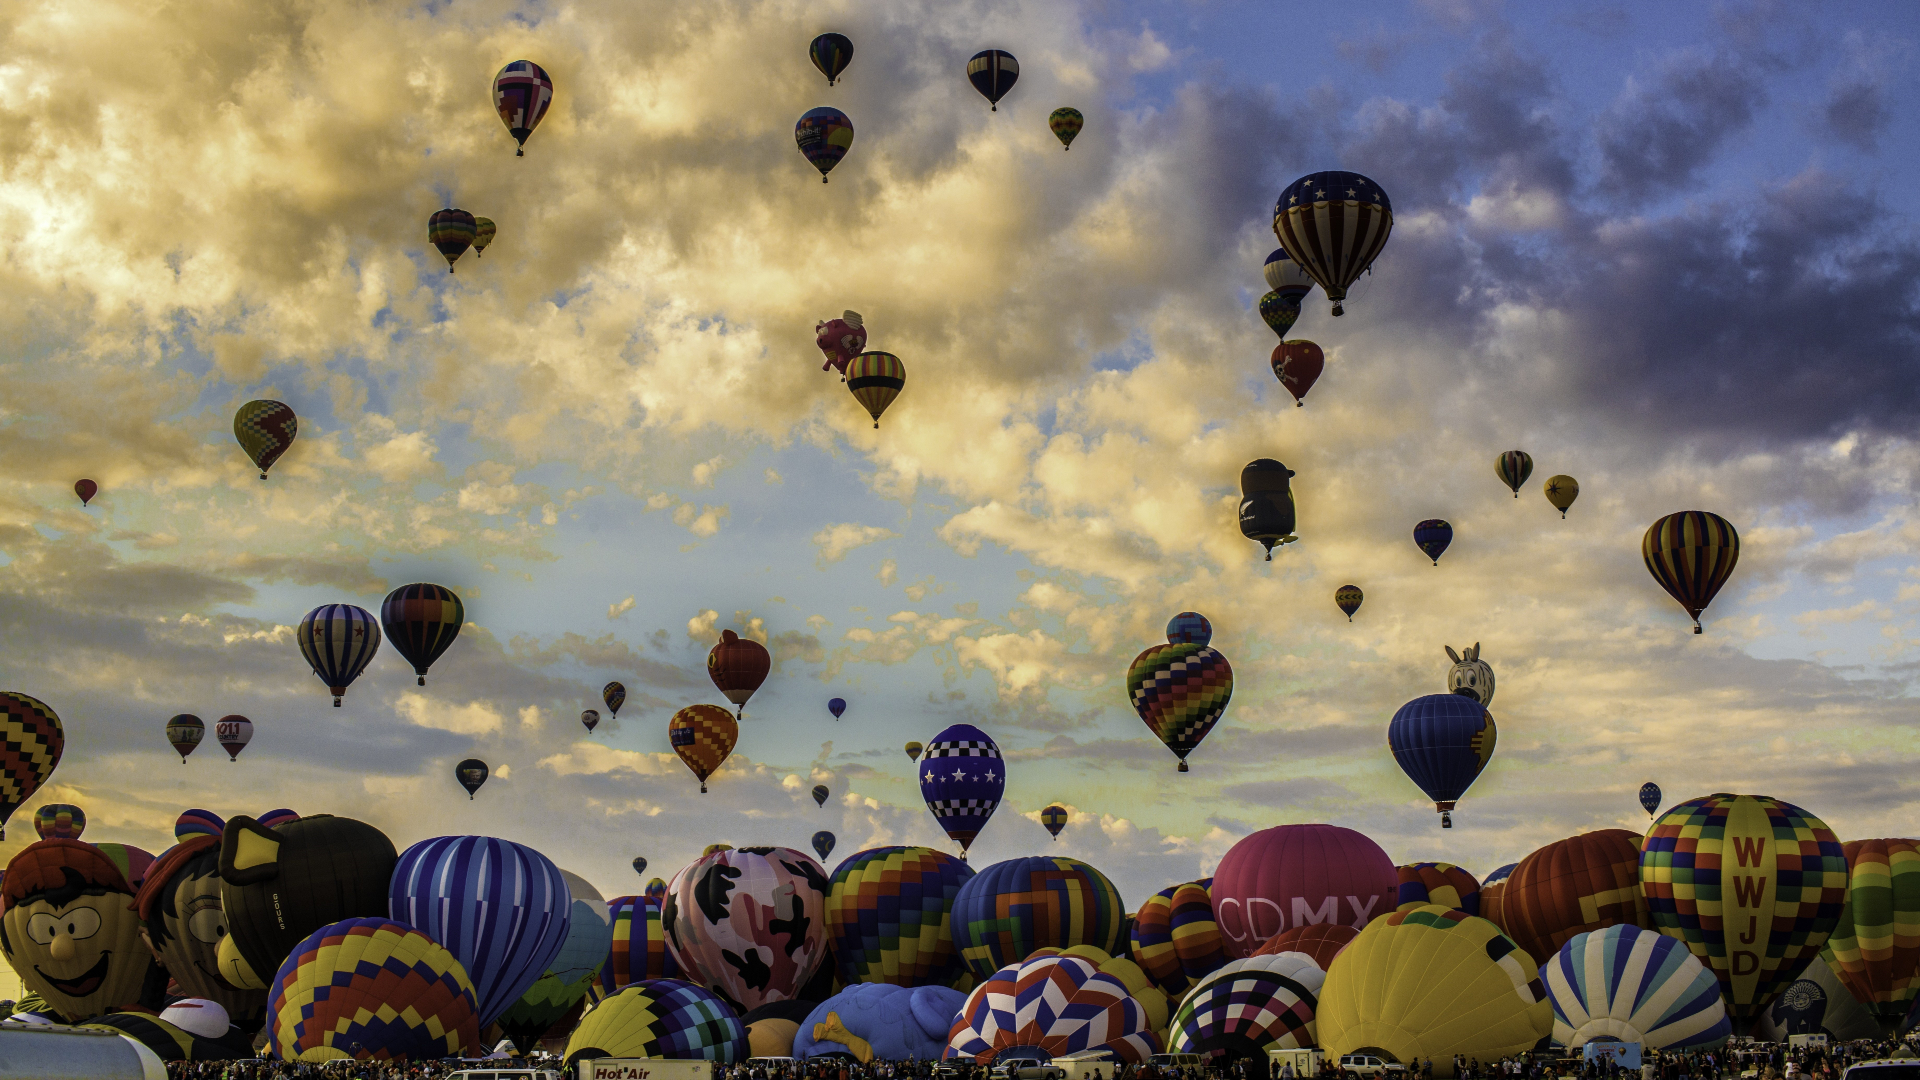 Albuquerque International Balloon Fiesta with hundreds of hot air balloons taking to the skies.